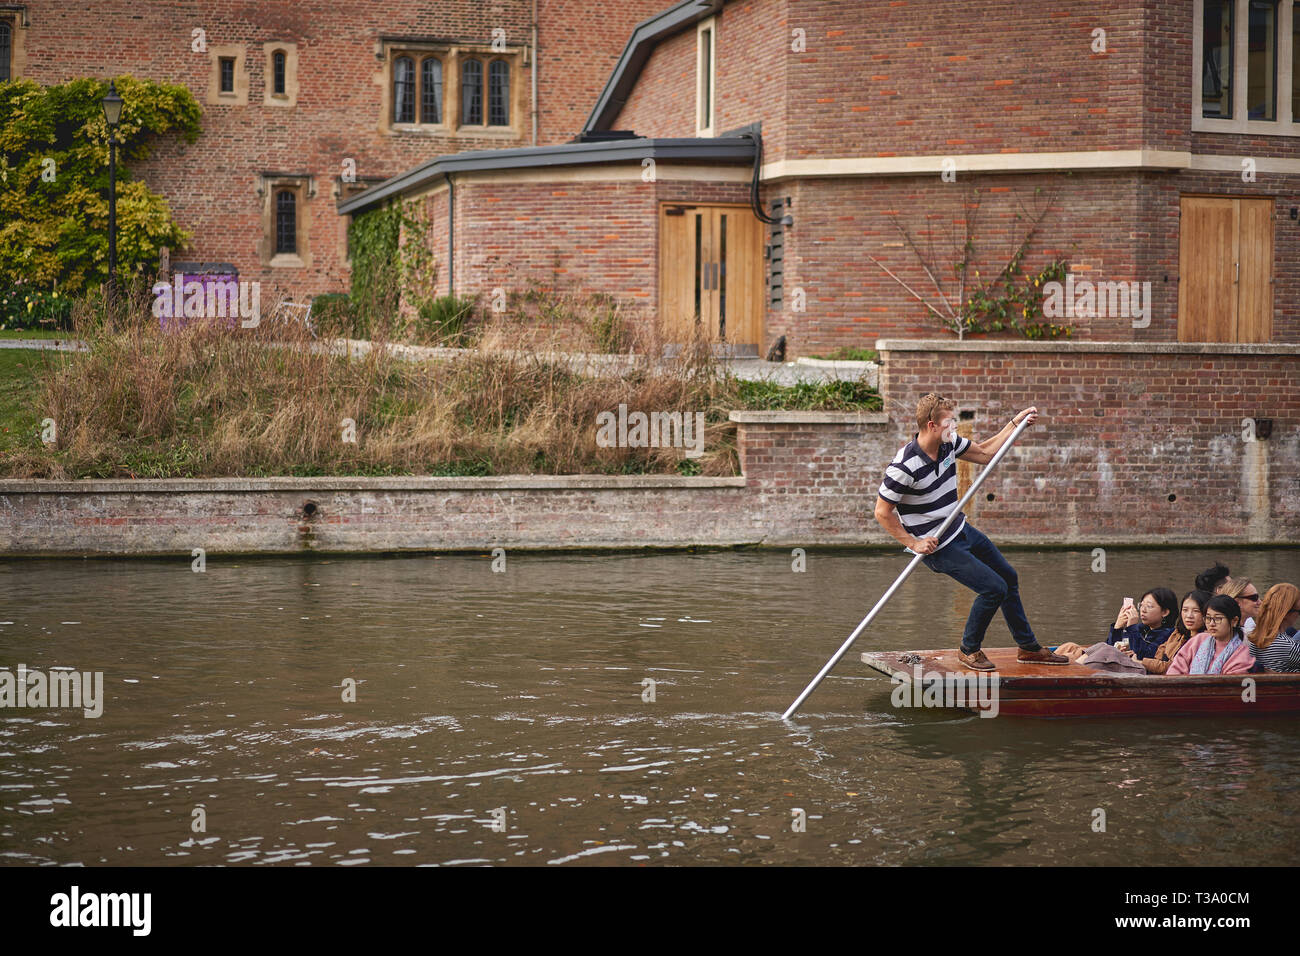 Cambridge. UK - December, 2018. Punt boats on the river Cam. Punting is very popular in Cambridge for sightseeing colleges. Stock Photo